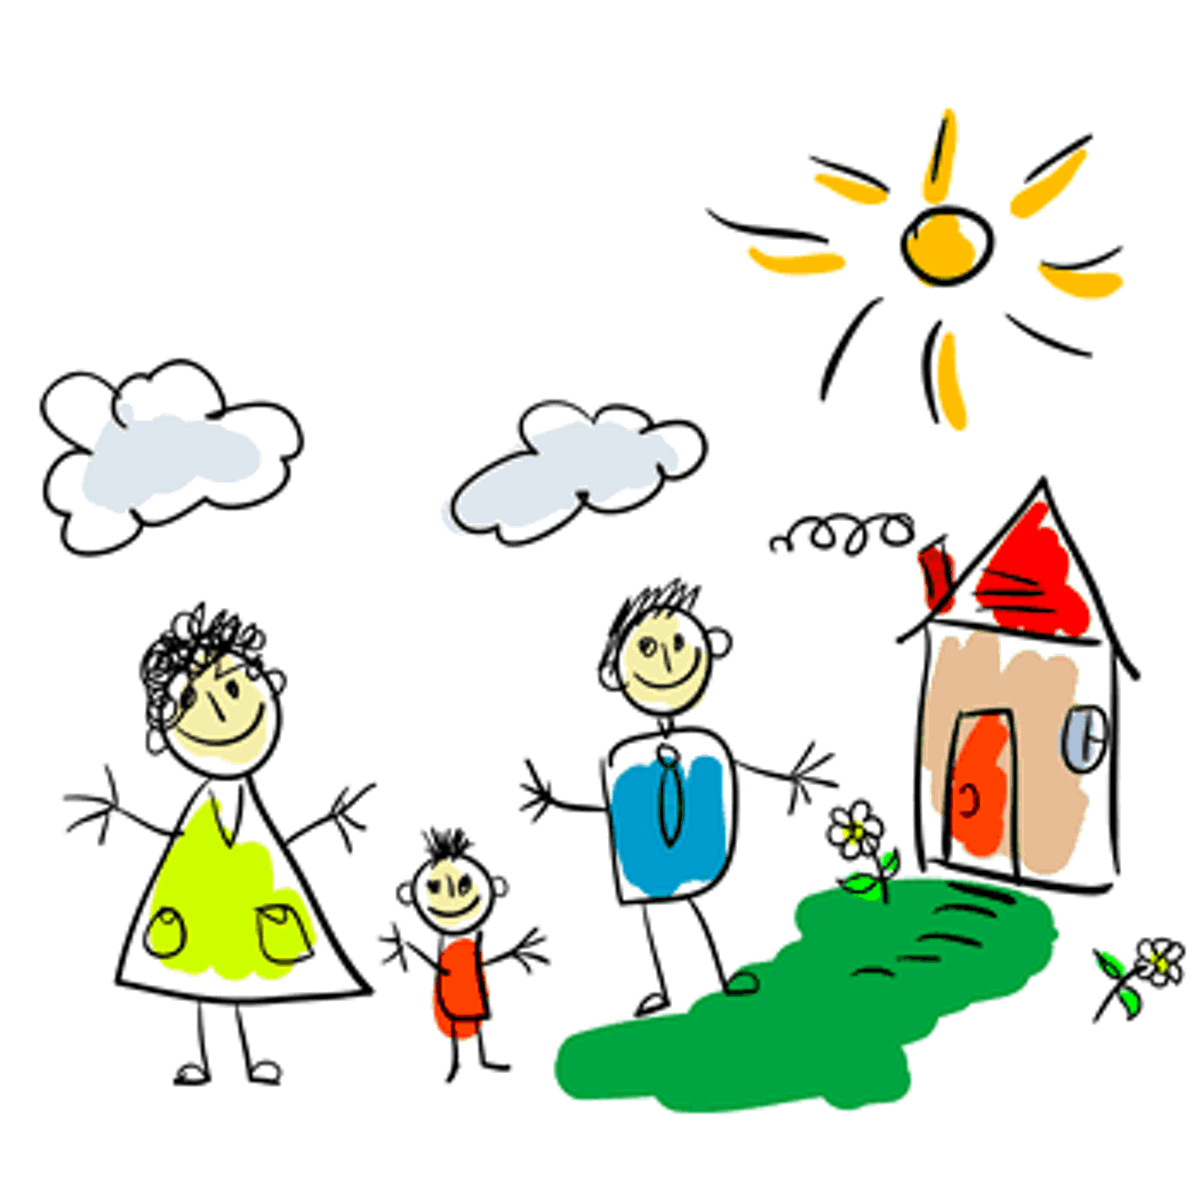 Cartoon Family Images - ClipArt Best